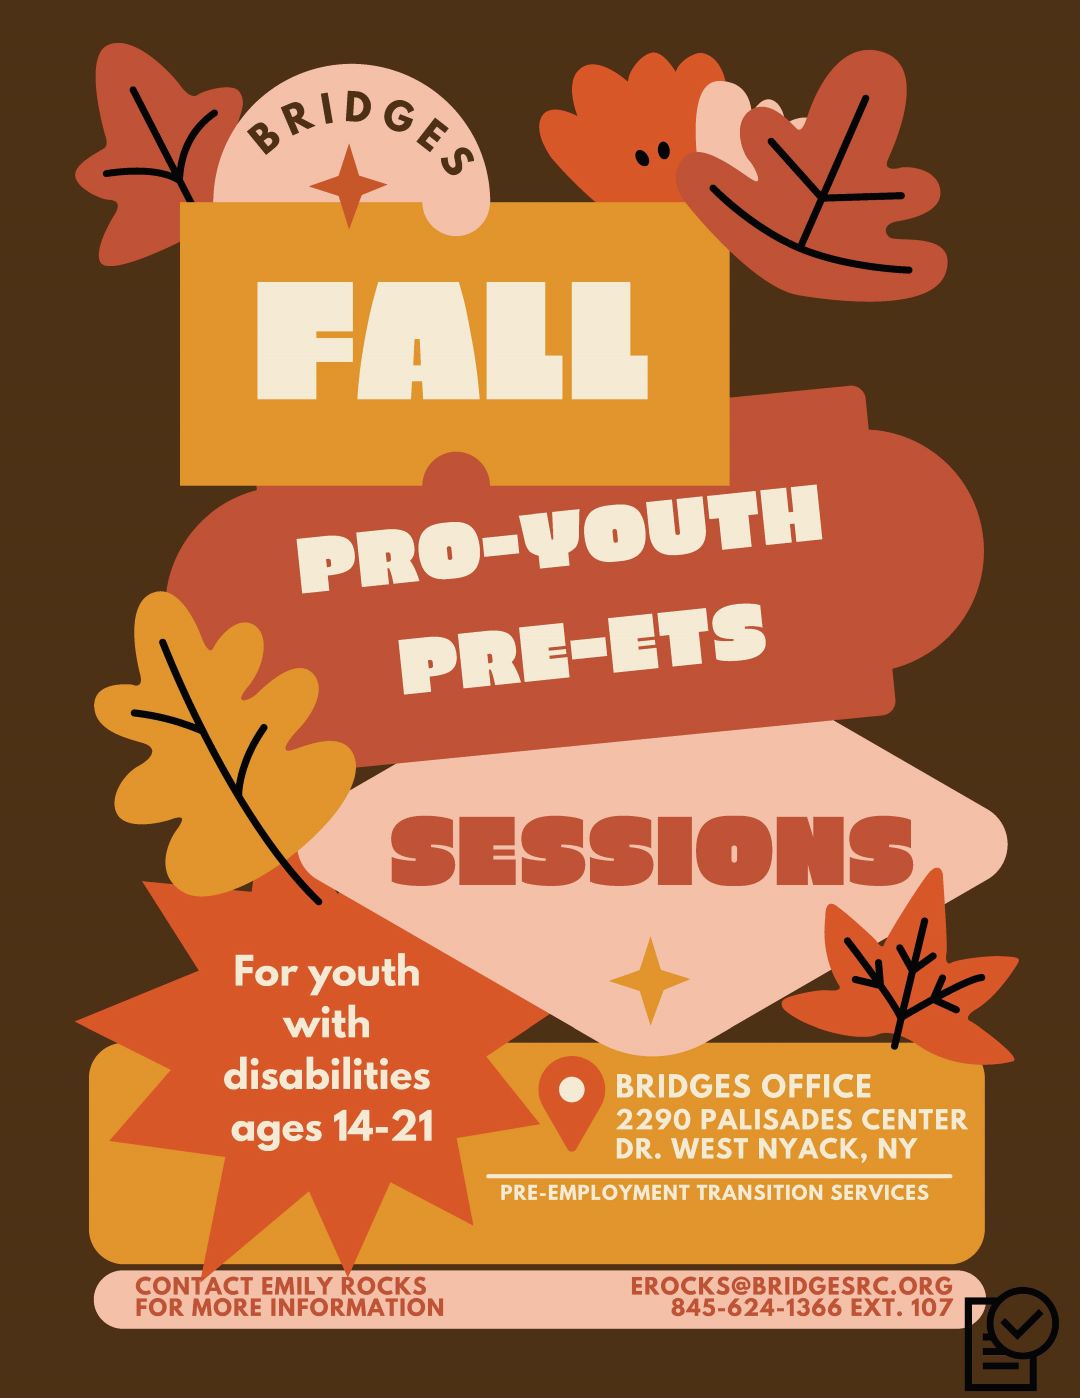 Fall Pro-Youth Pre-ETS Sessions. For youth with disabilities ages 14 - 21. Location: Bridges office, 2290 Palisades Center Drive, West Nyack, NY. Pre-Employment Transition Services. Contact Emily Rocks at 845-624-1366 extension 107 or ERocks@BridgesRC.org.